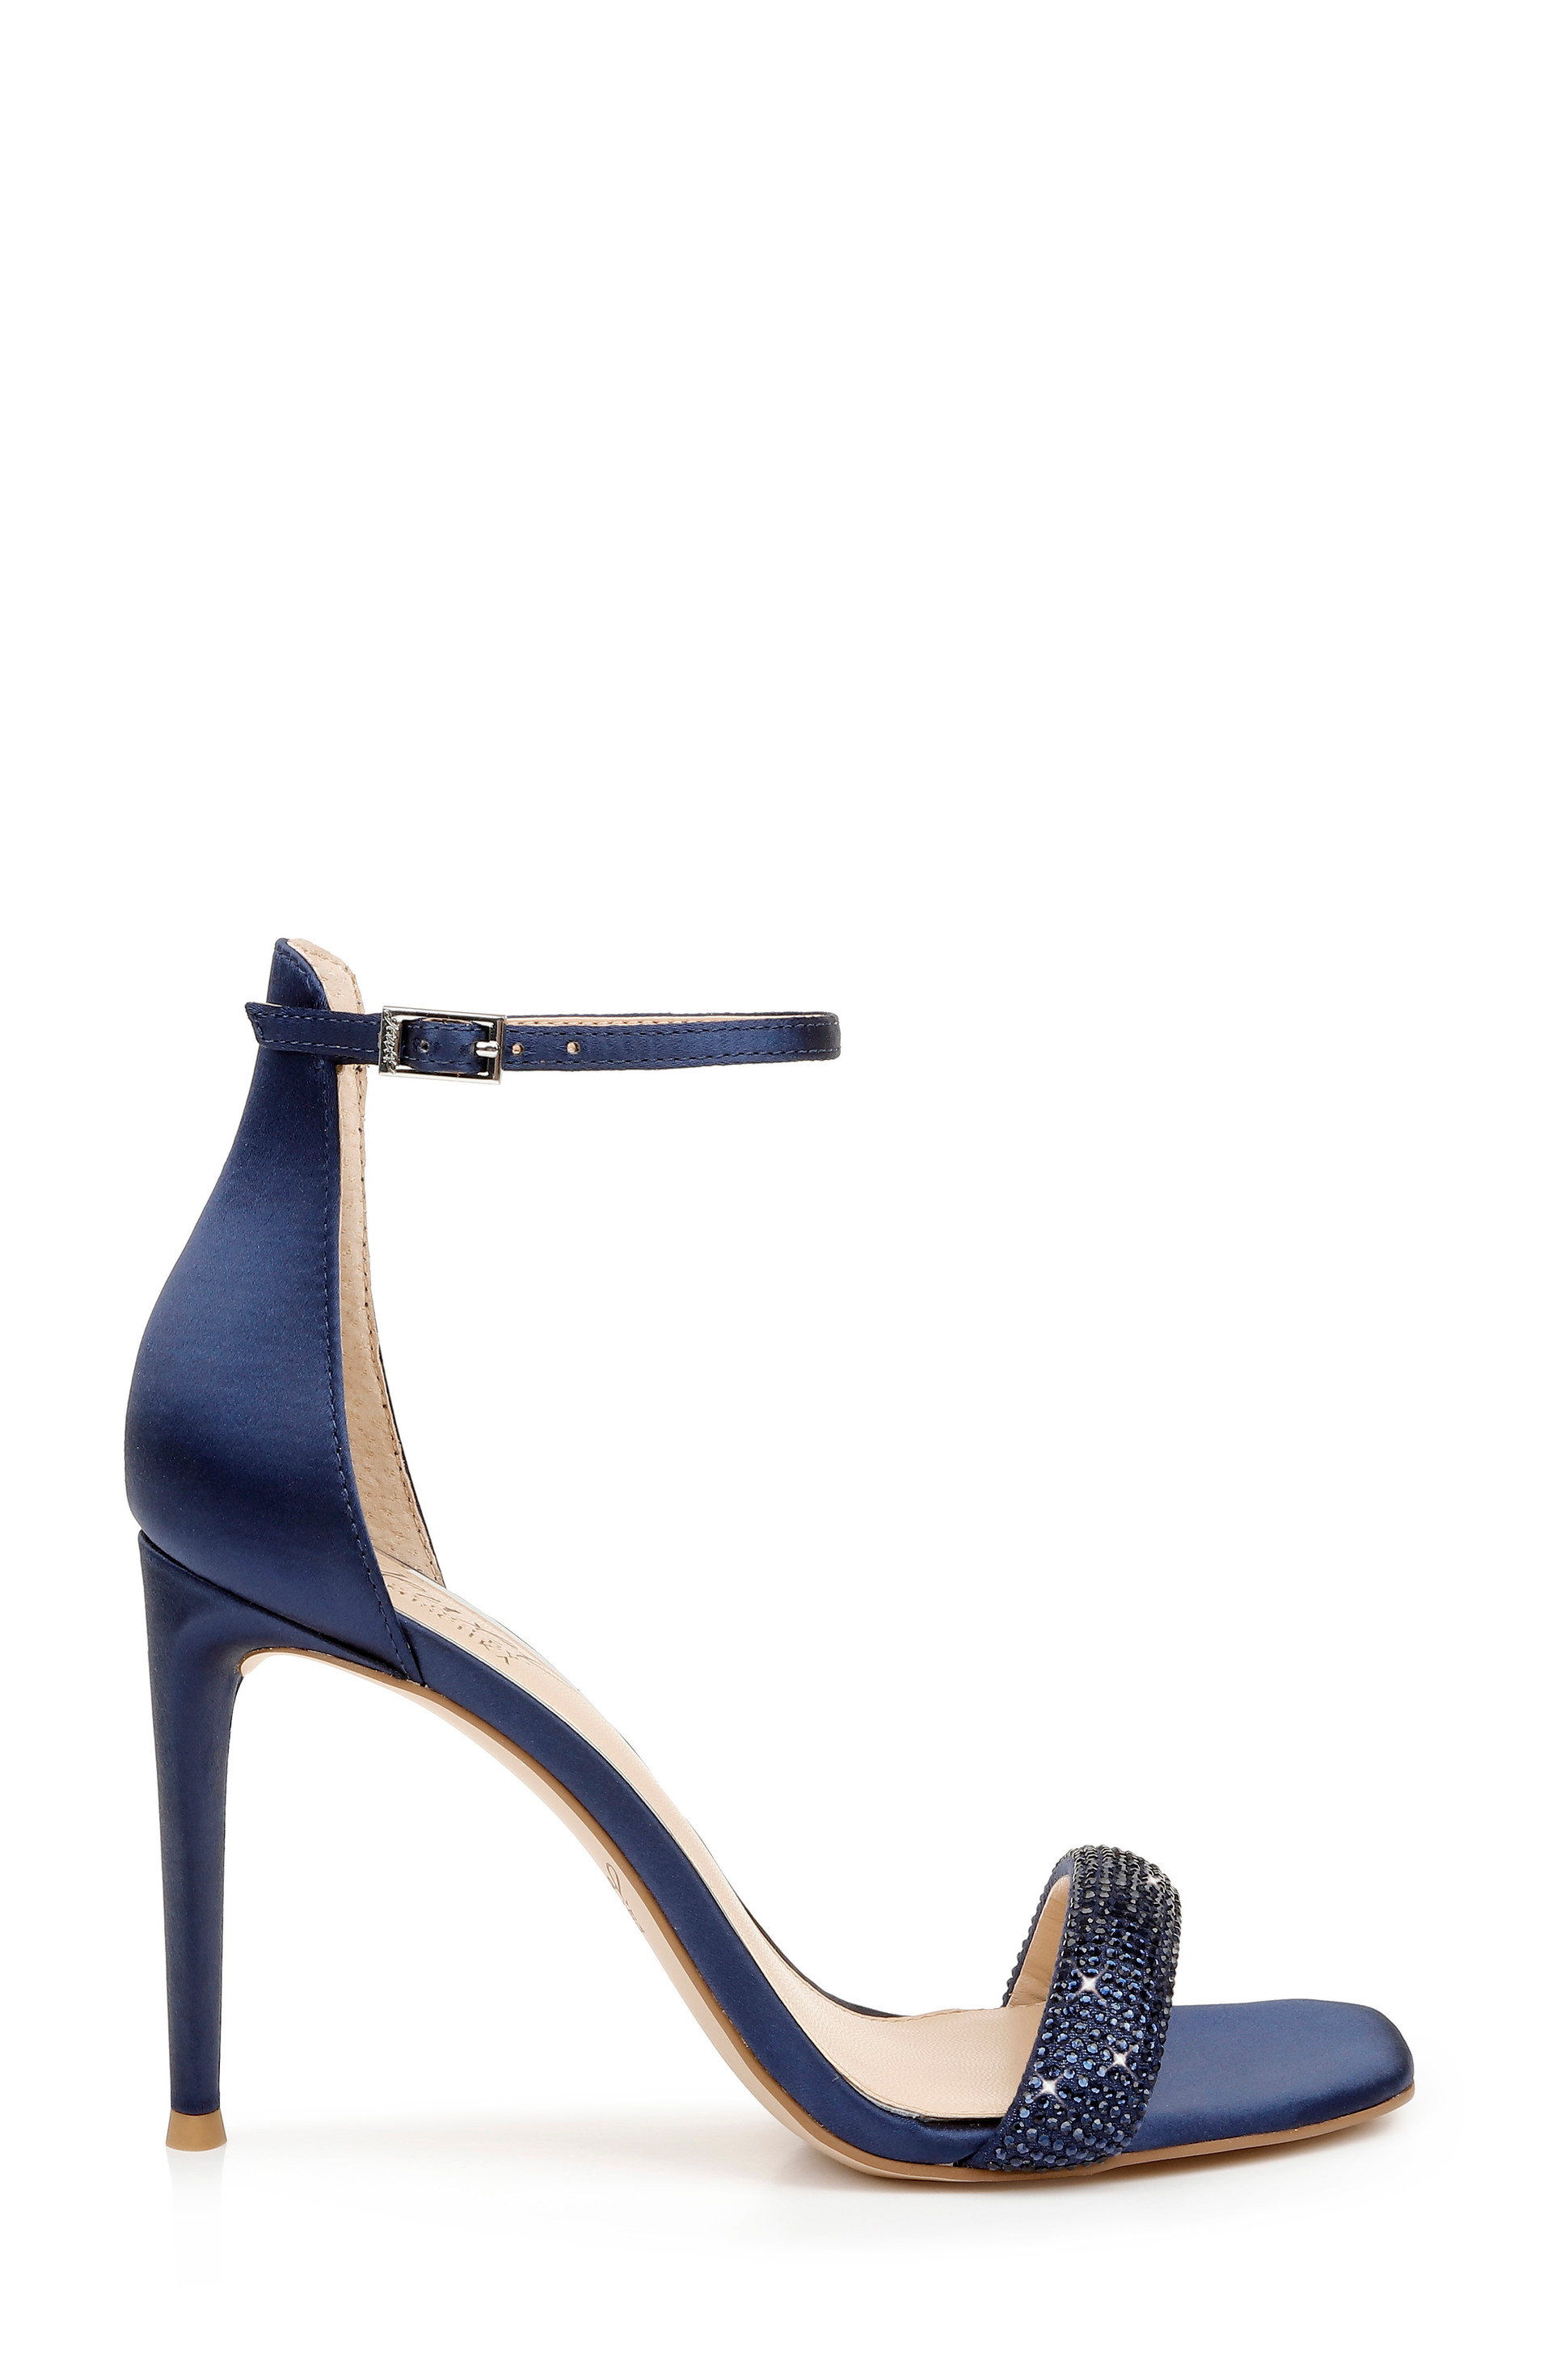 Easter Ankle Strap Stiletto by Badgley Mischka